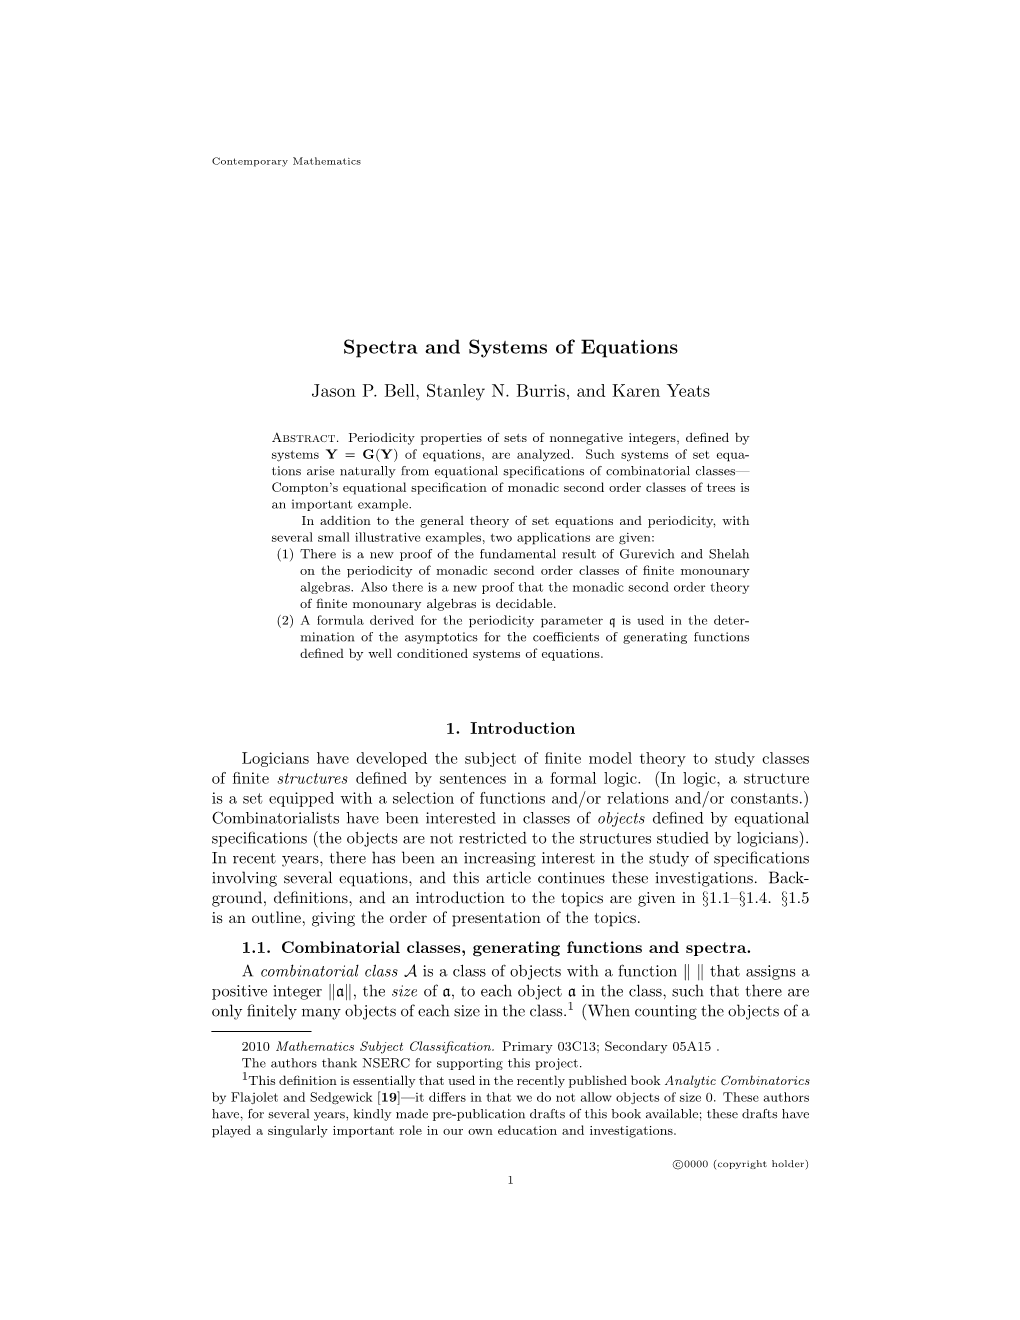 Spectra and Systems of Equations